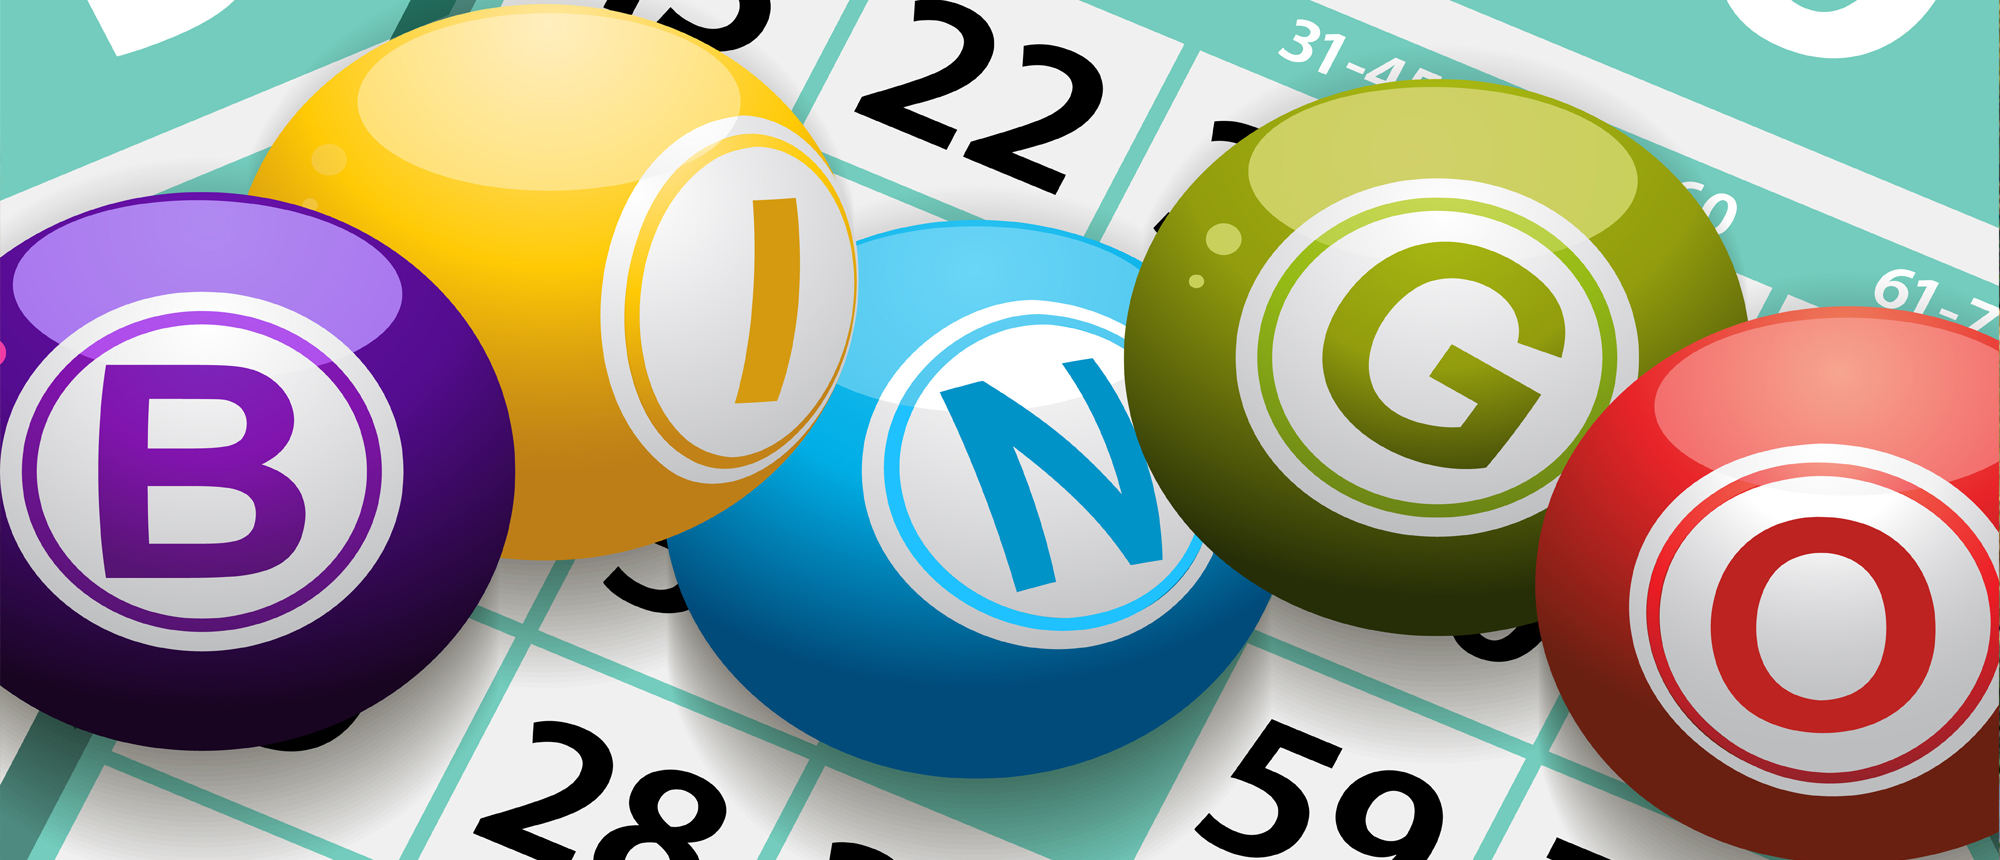 Aug 25: Virtual Bingo for Parents & Guardians - Youth Assisting Youth